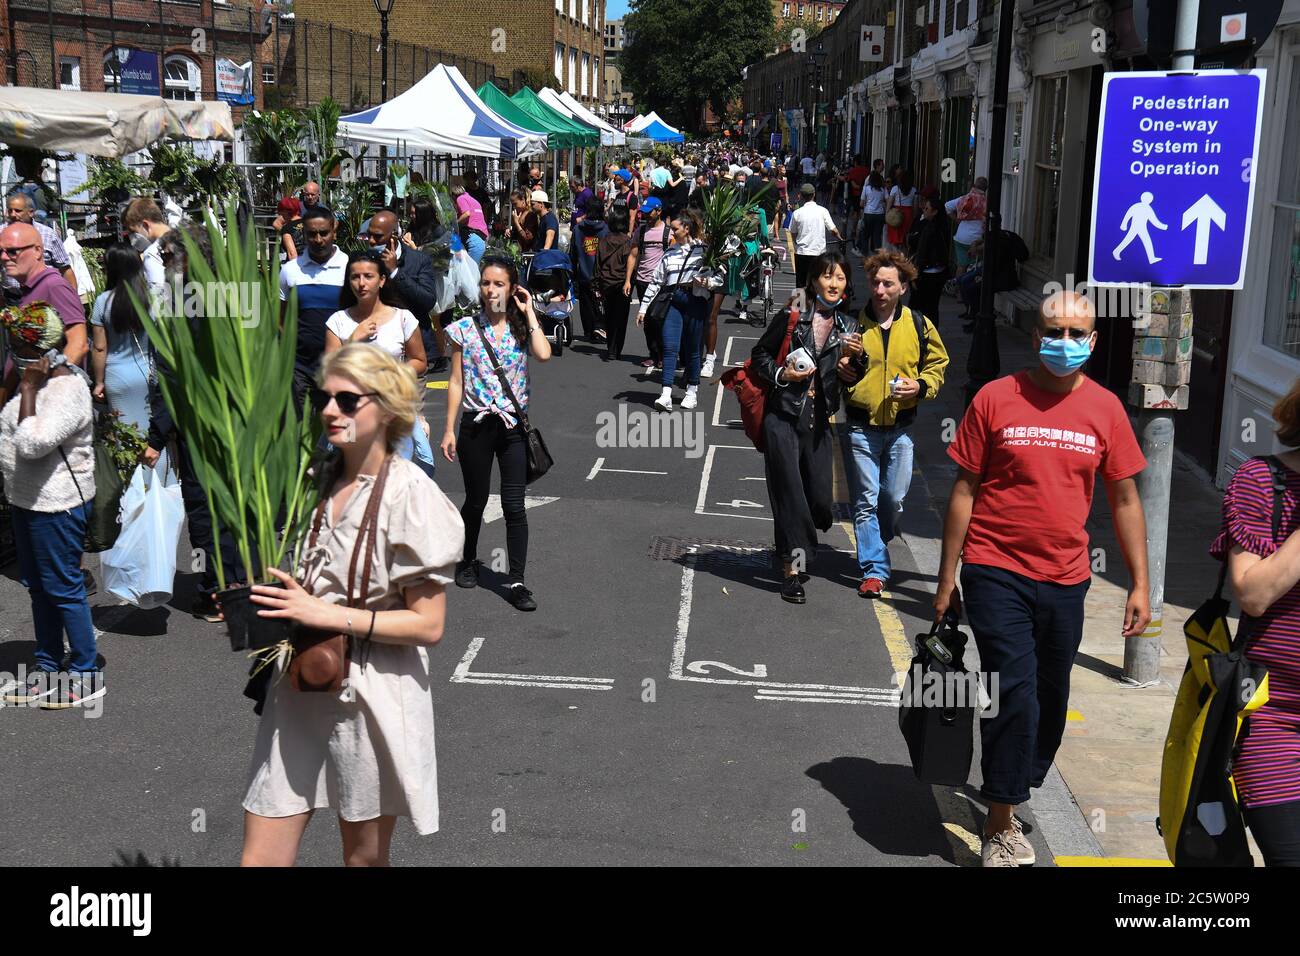 A one way system in place at Columbia Road Flower Market, London, as it reopens following the easing of coronavirus lockdown restrictions across England. Stock Photo